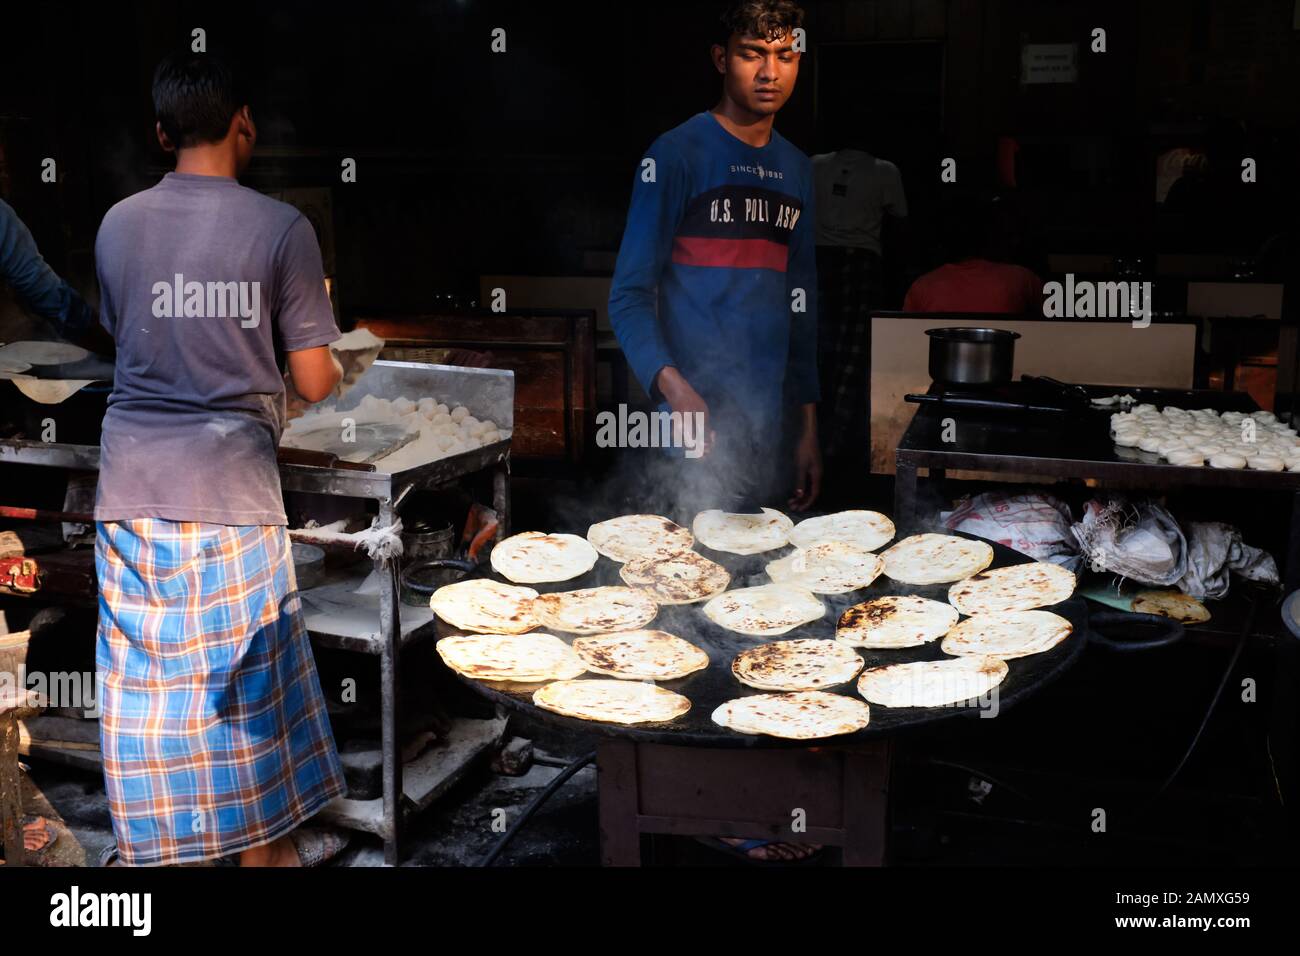 https://c8.alamy.com/comp/2AMXG59/at-a-cheap-roadside-restaurant-in-the-bhendi-bazar-area-of-mumbai-bombay-india-cooks-are-preparing-rotis-flatbreads-on-a-tawa-hot-plate-2AMXG59.jpg